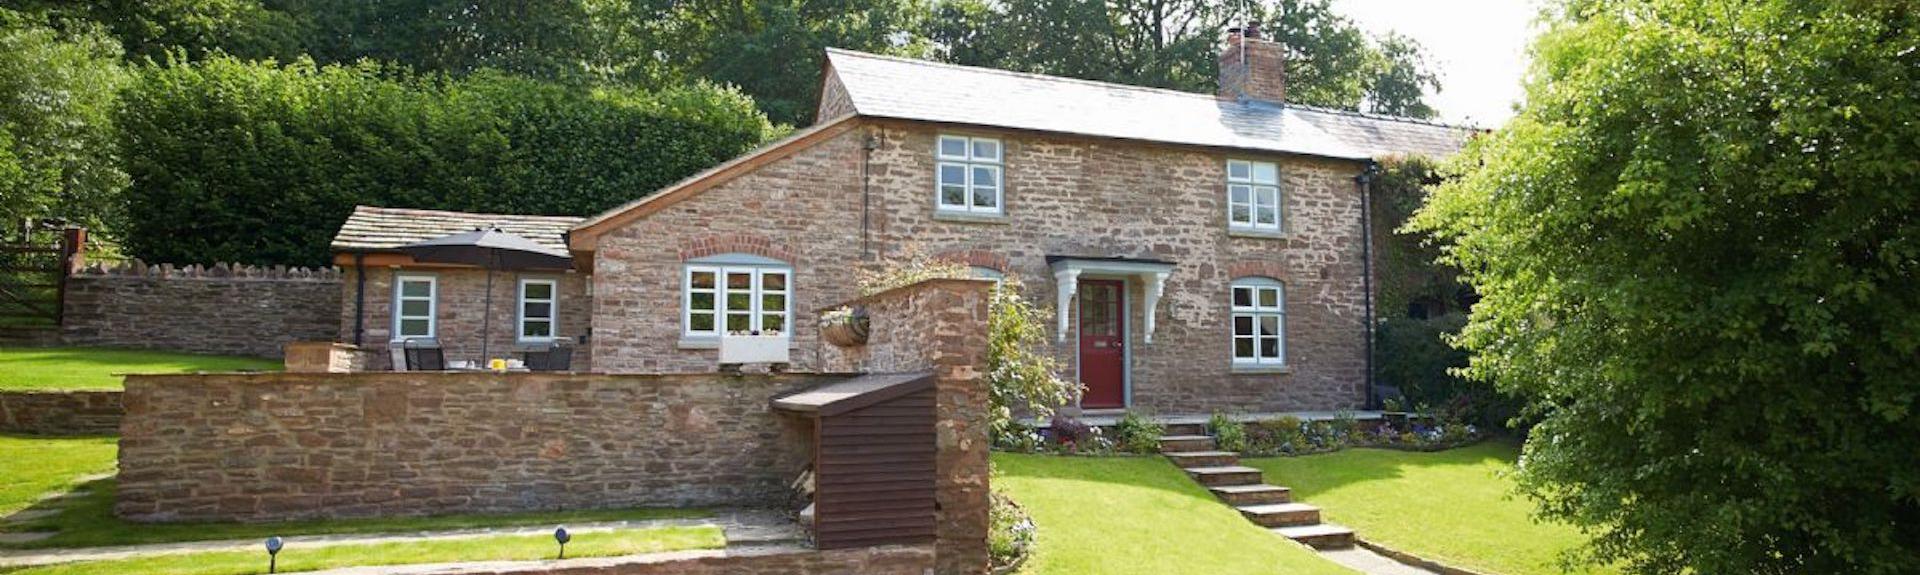 A stone-built Herefordshire cottage overlooks a tree-lined lawn and parking space.